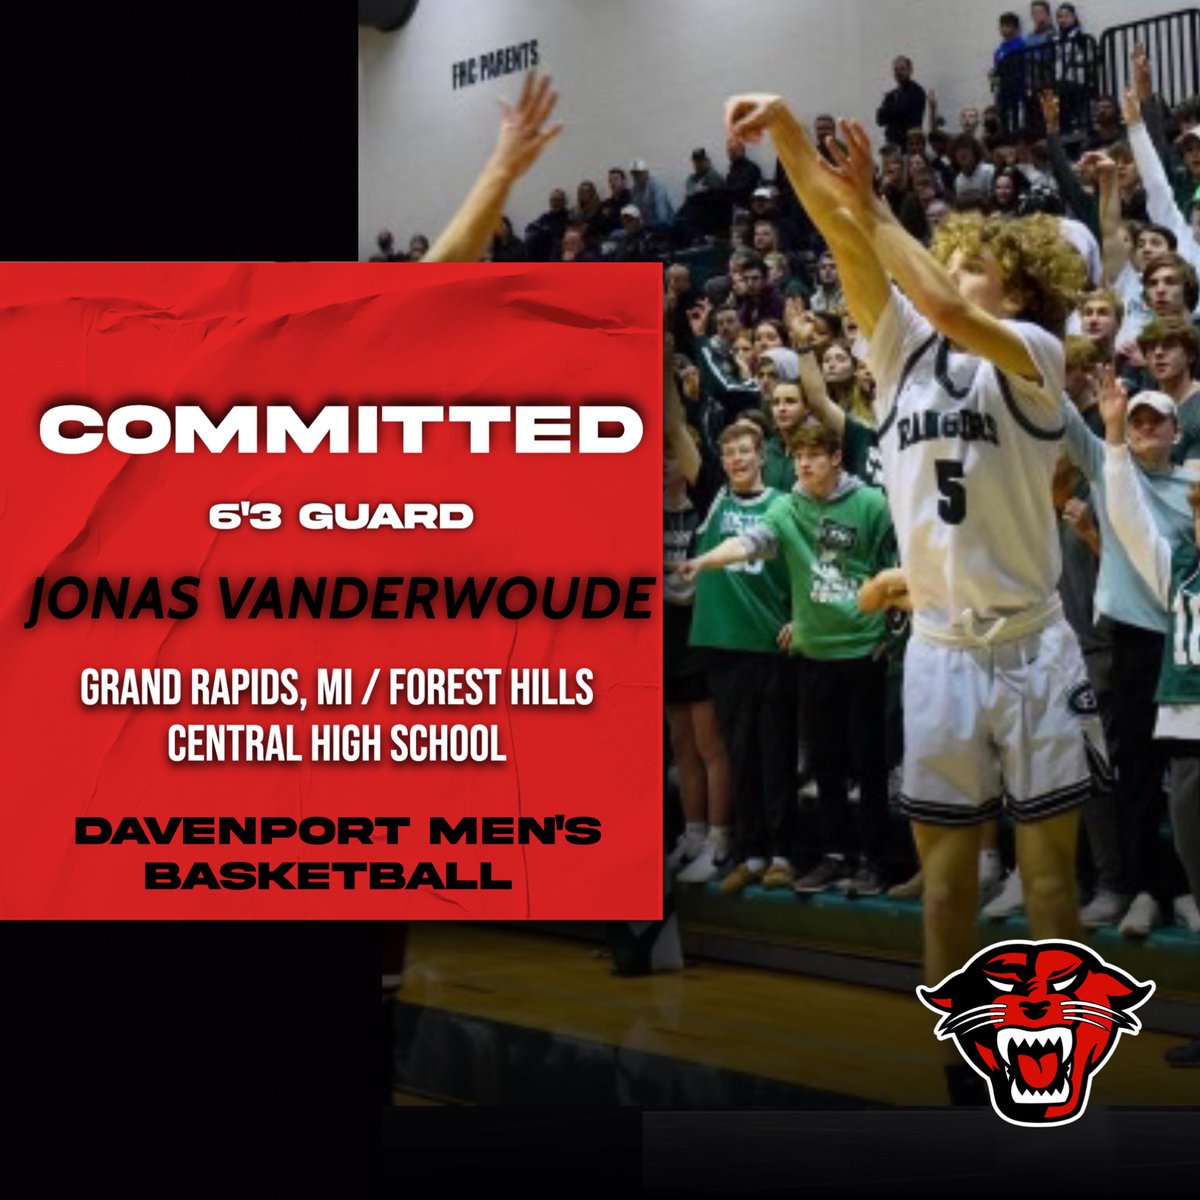 It is time to welcome the next addition to the Panther Family, Jonas VanderWoude! 🐾🏀